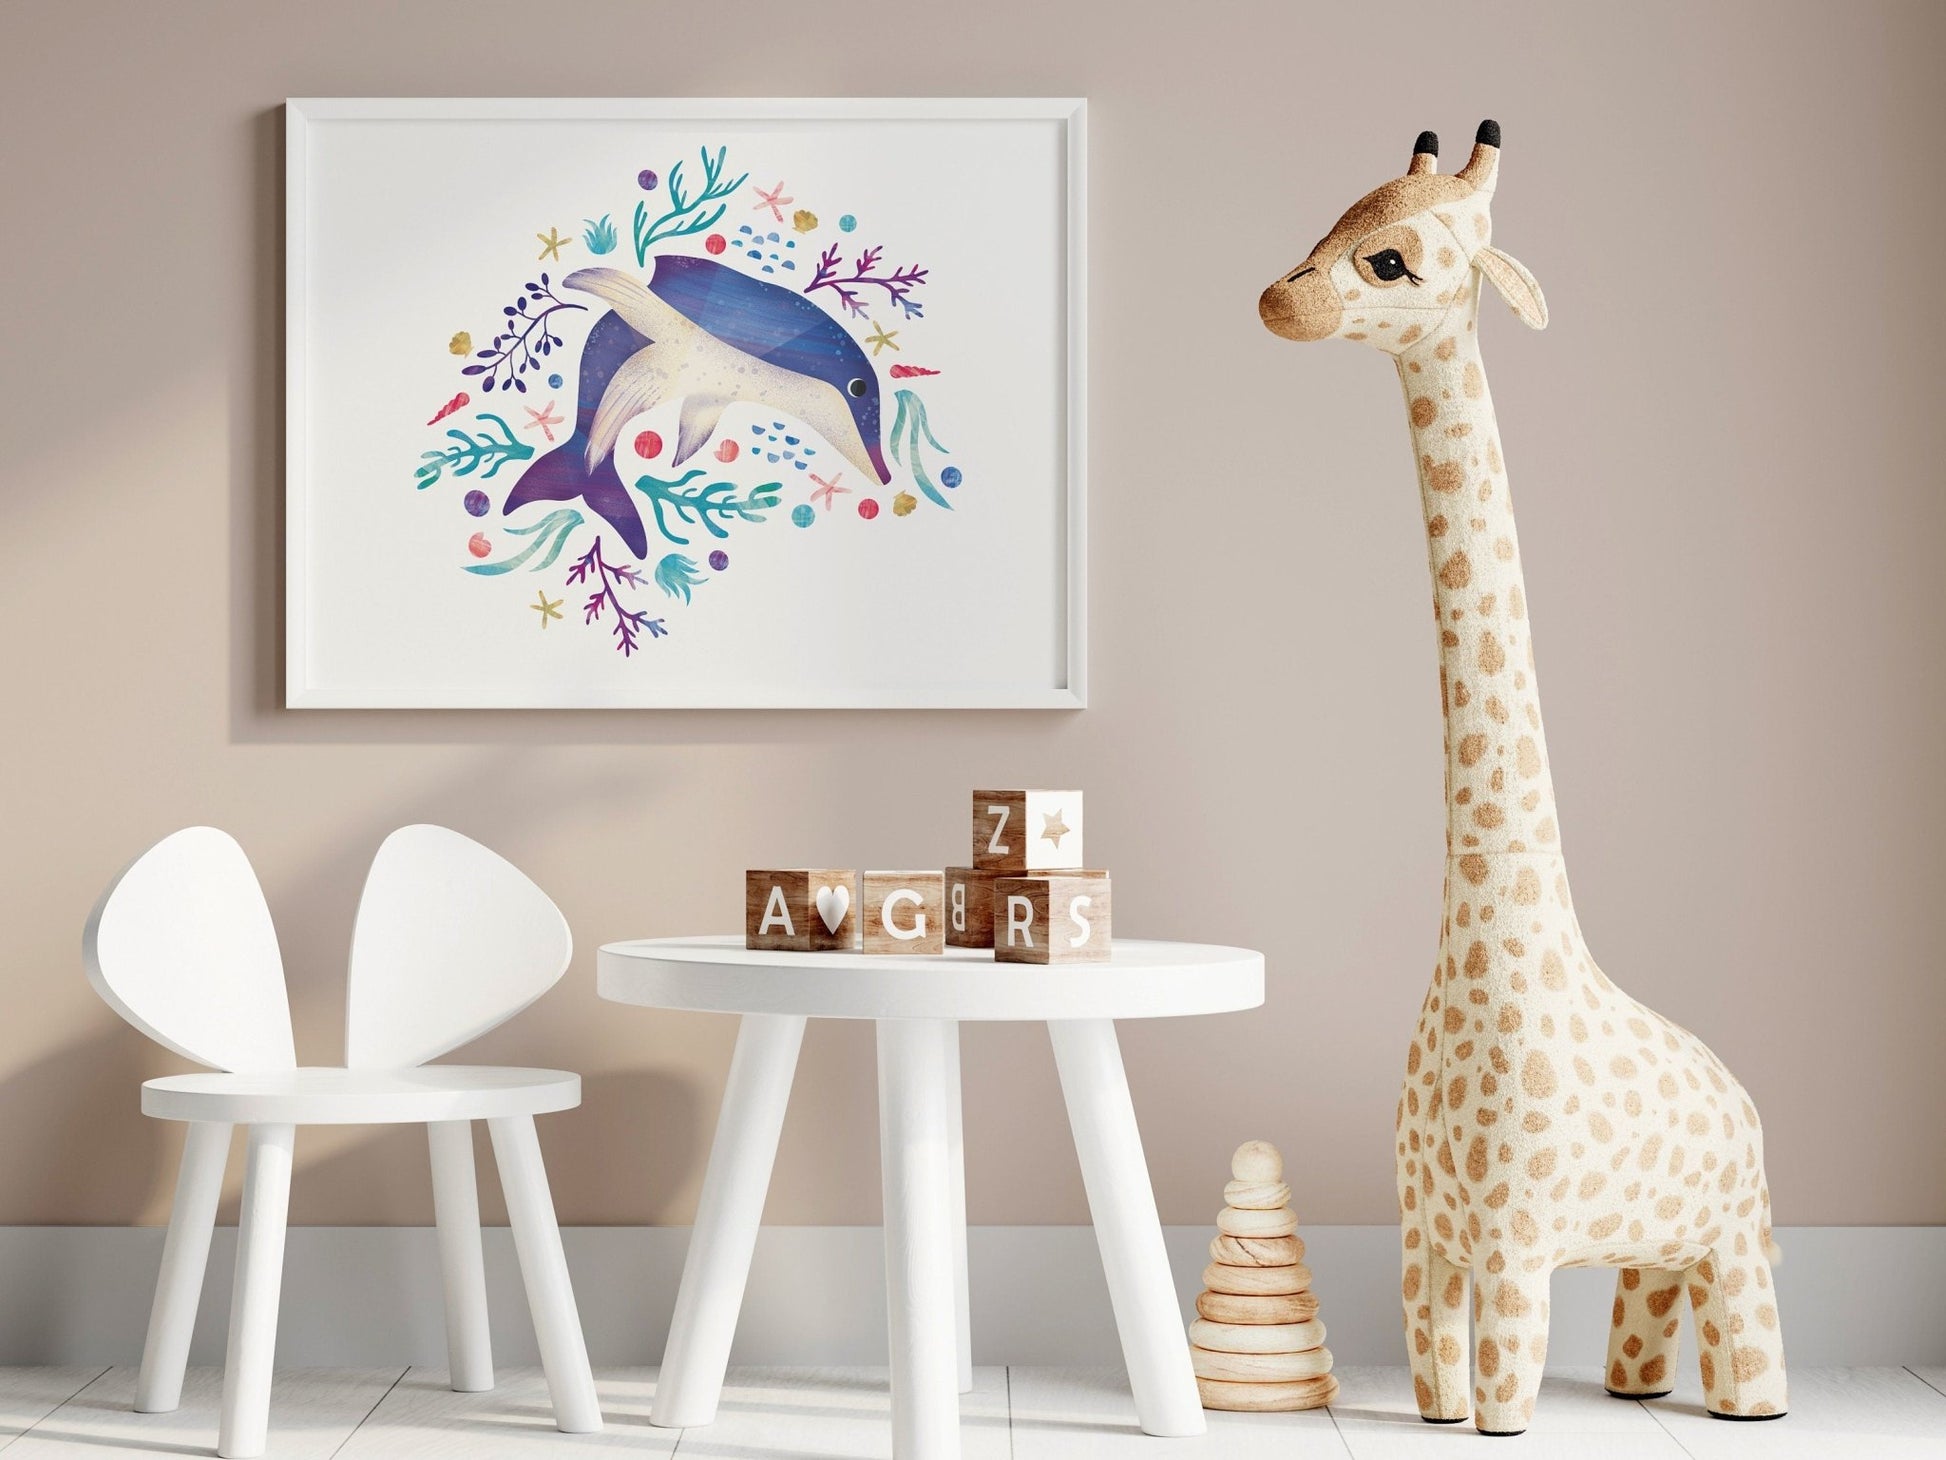 Ocean animal nursery prints - Dolly and Fred Designs